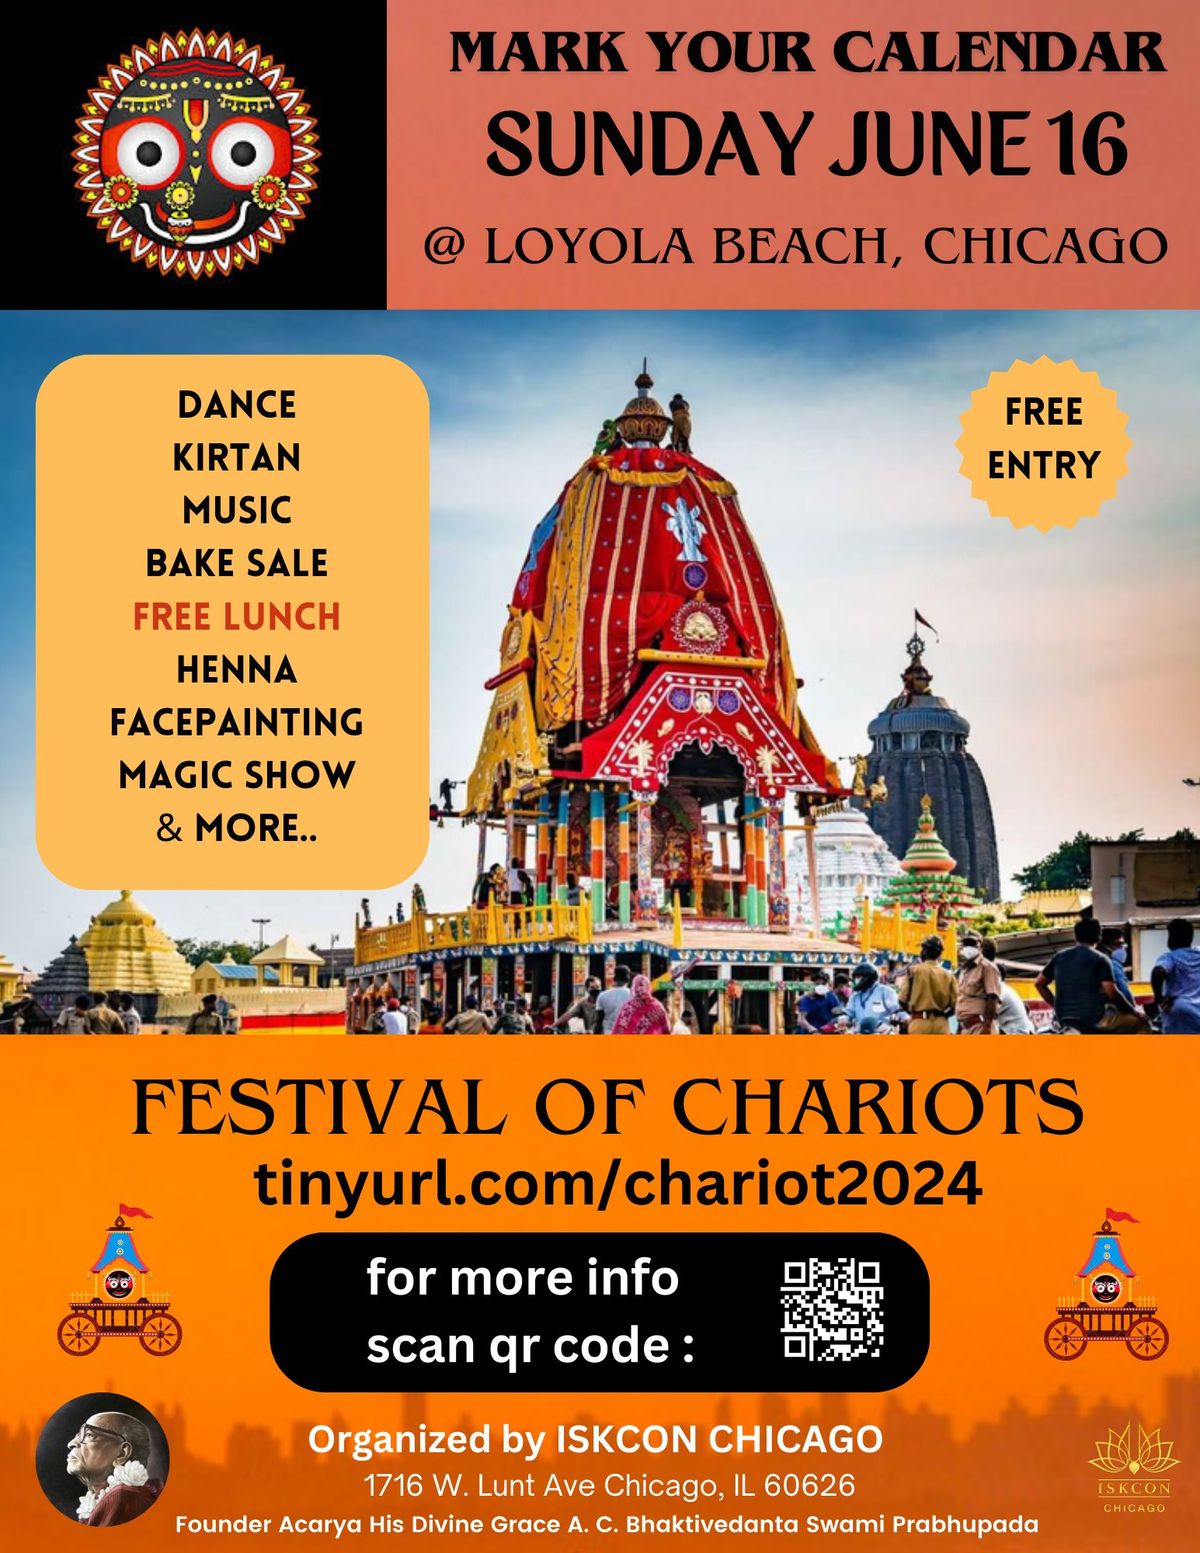 Festival of Chariots @ the beach - SUNDAY JUNE 16th - FREE ENTRY with FREE LUNCH